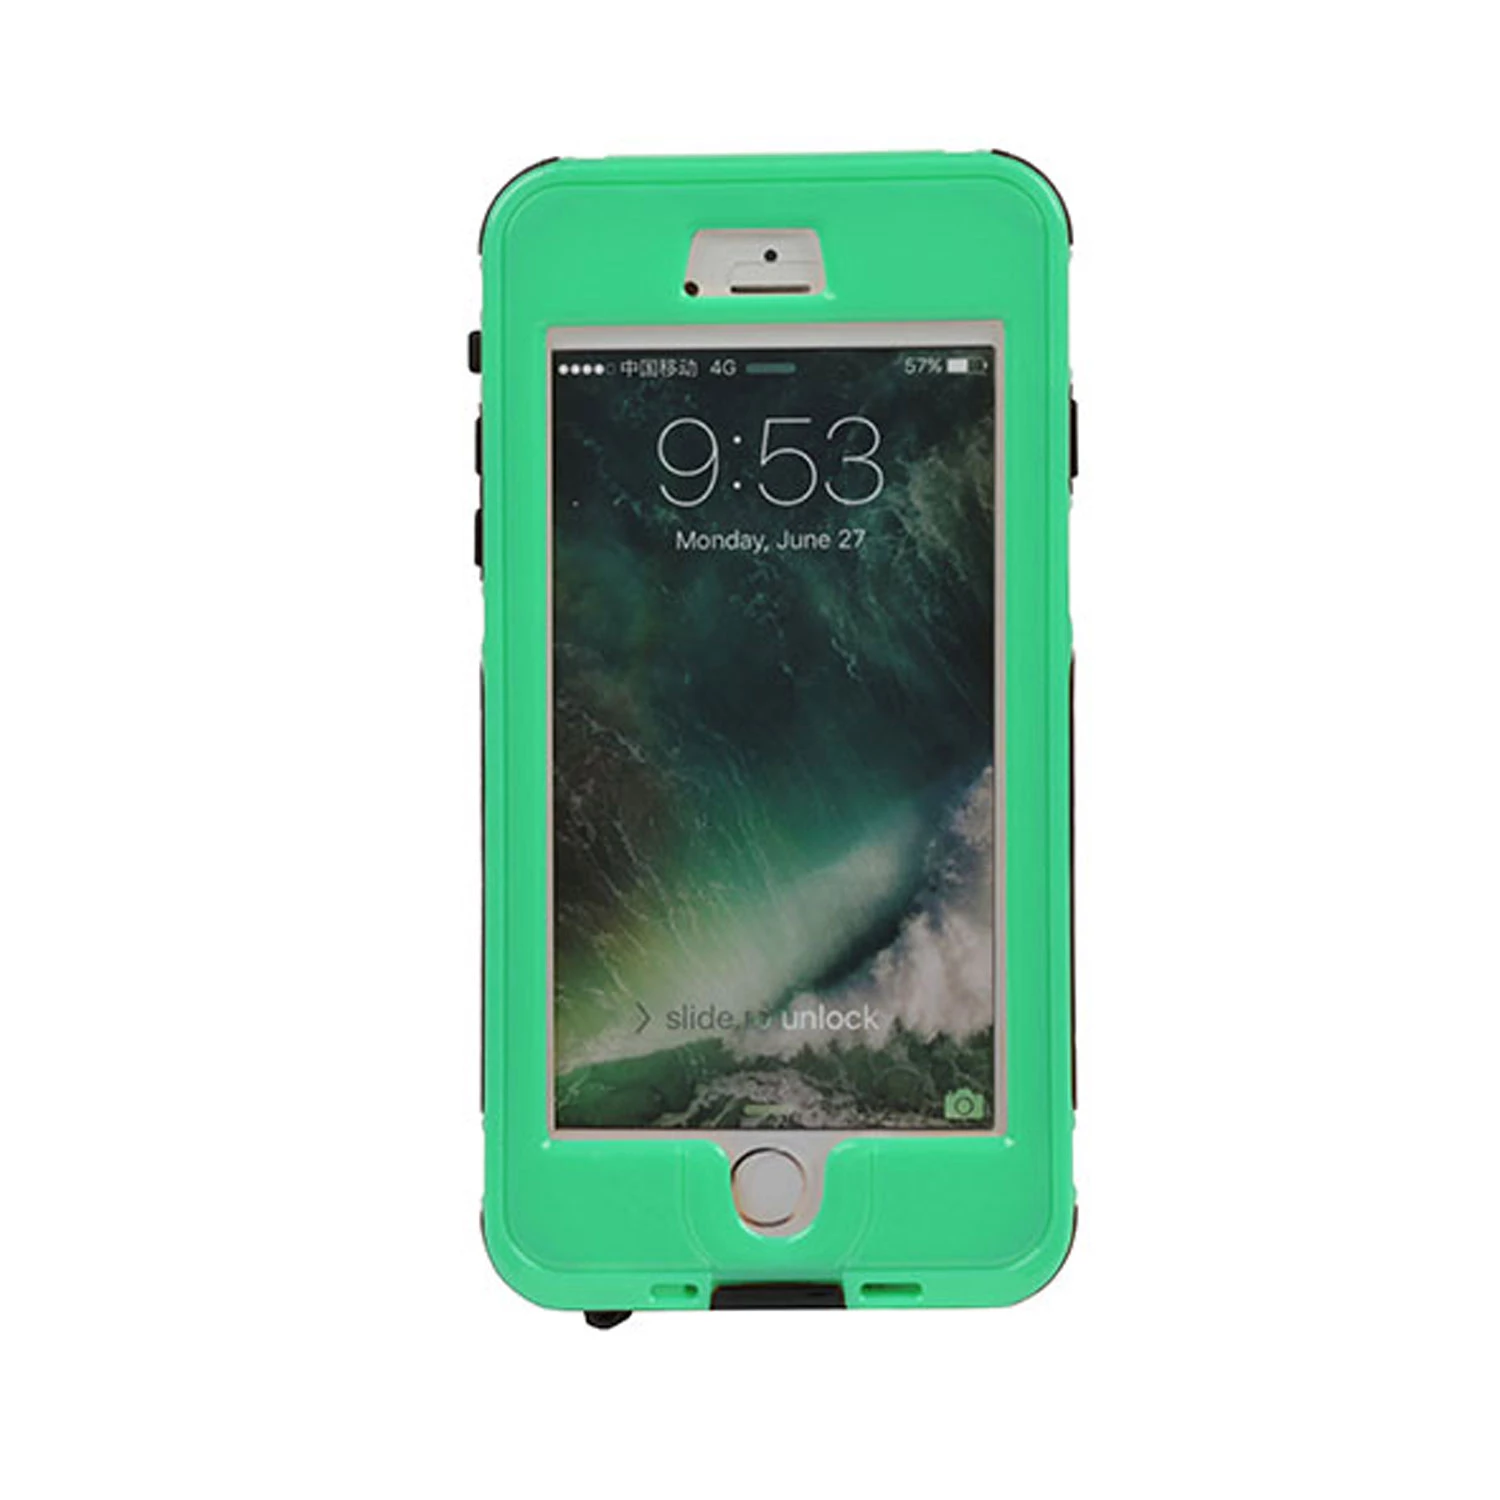 Rugged Water-proof Hybrid Full Cover Case For iPhone 6 Plus